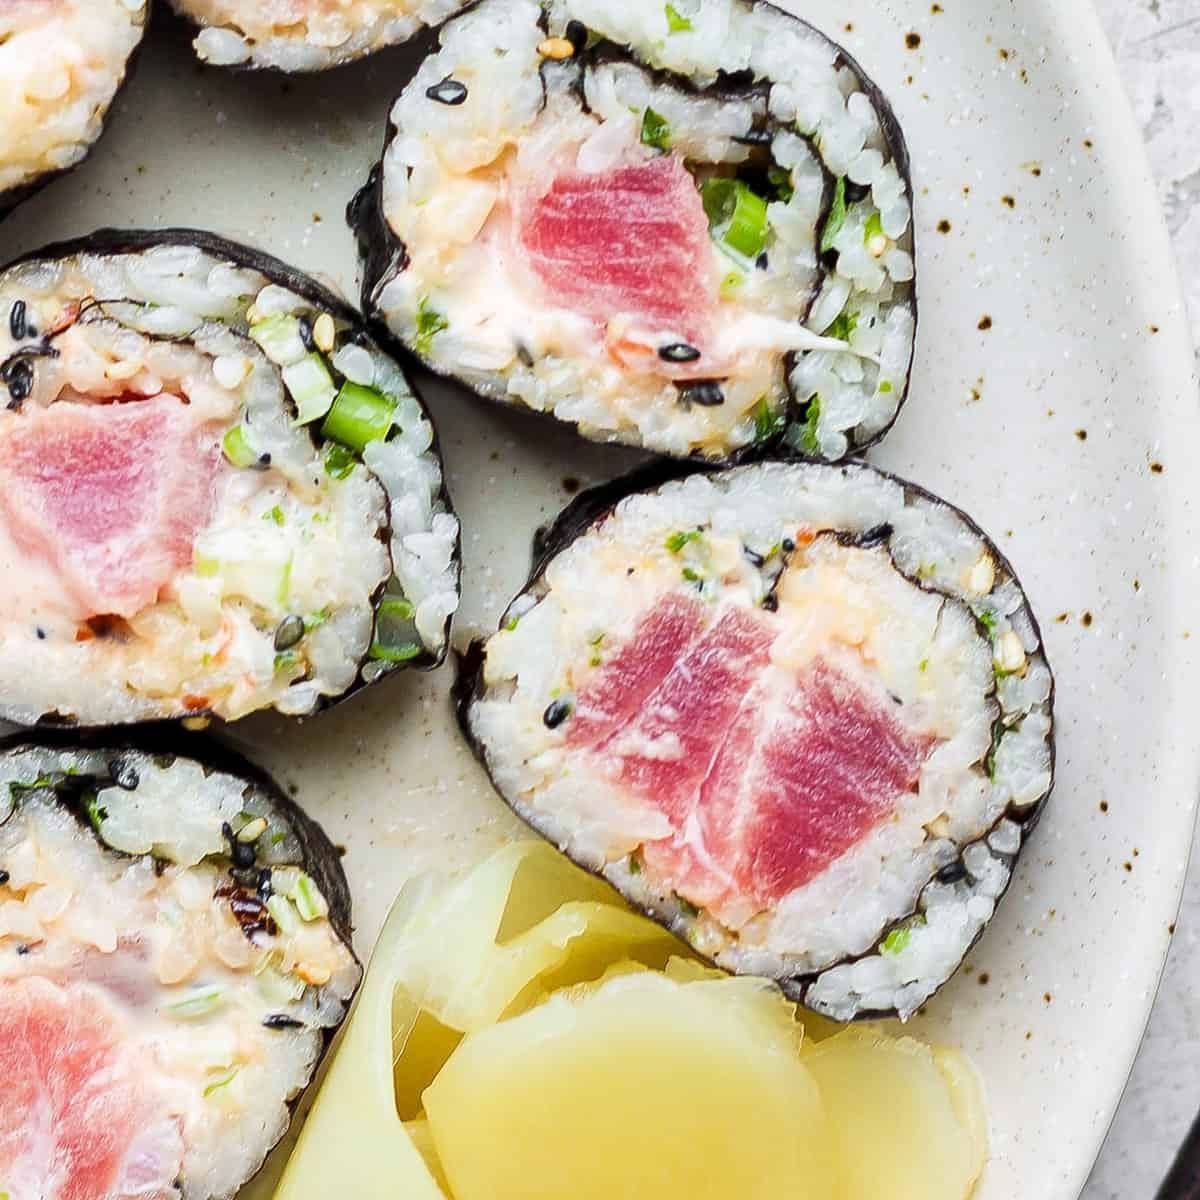 https://fitfoodiefinds.com/wp-content/uploads/2023/06/Spicy-Tuna-Roll-11.jpg